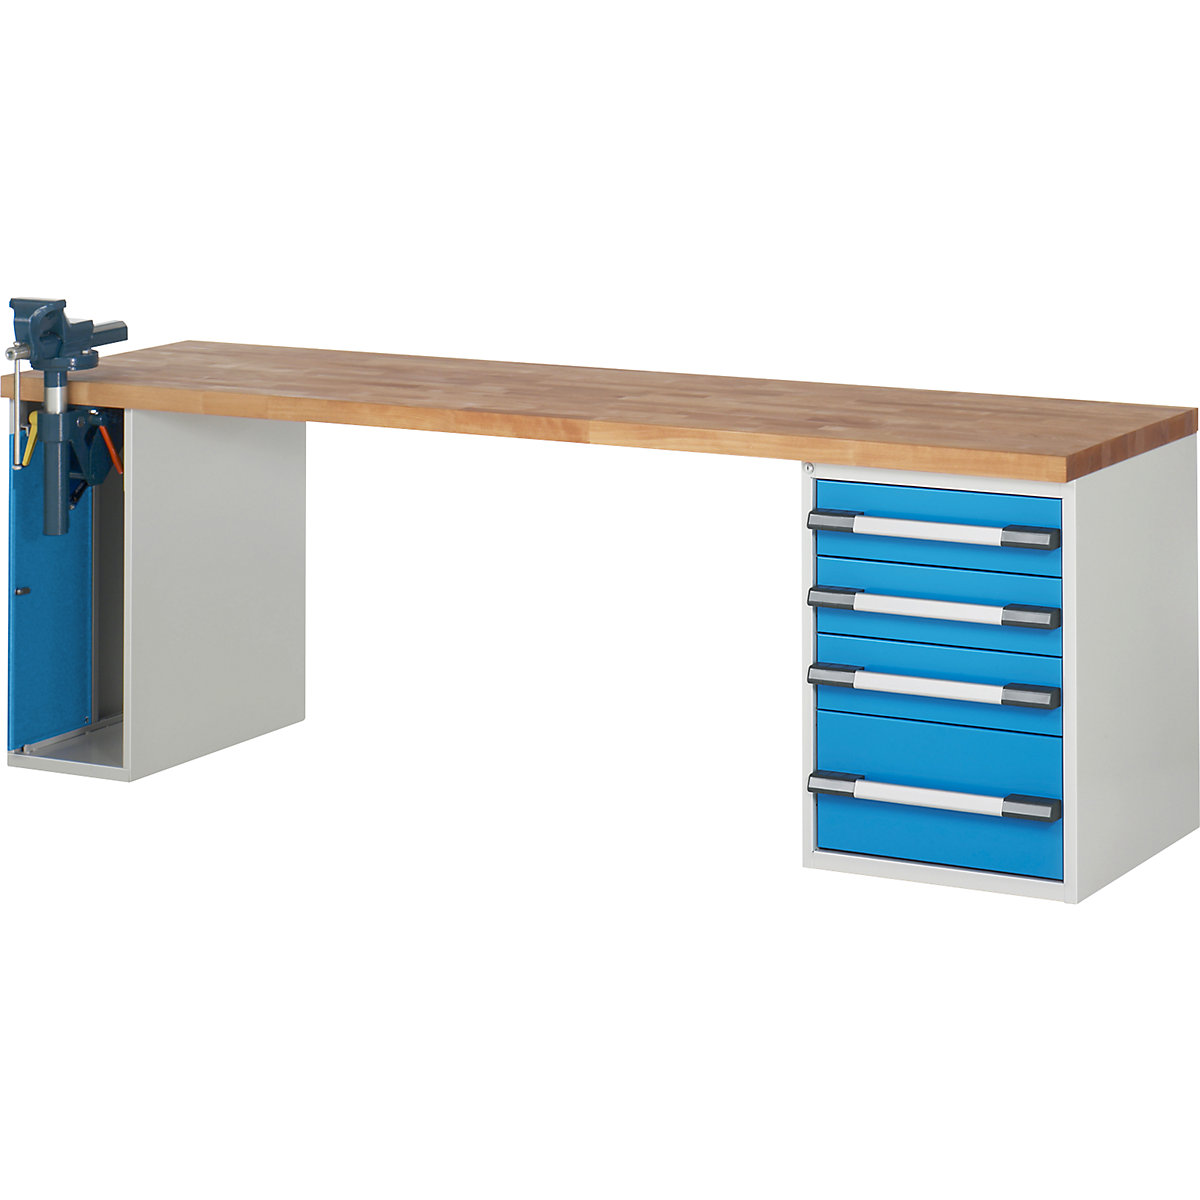 Workbench, Series 7 modular system – eurokraft pro, 1 cupboard, 1 fixed pedestal with 4 drawers, WxD 2500 x 700 mm-6